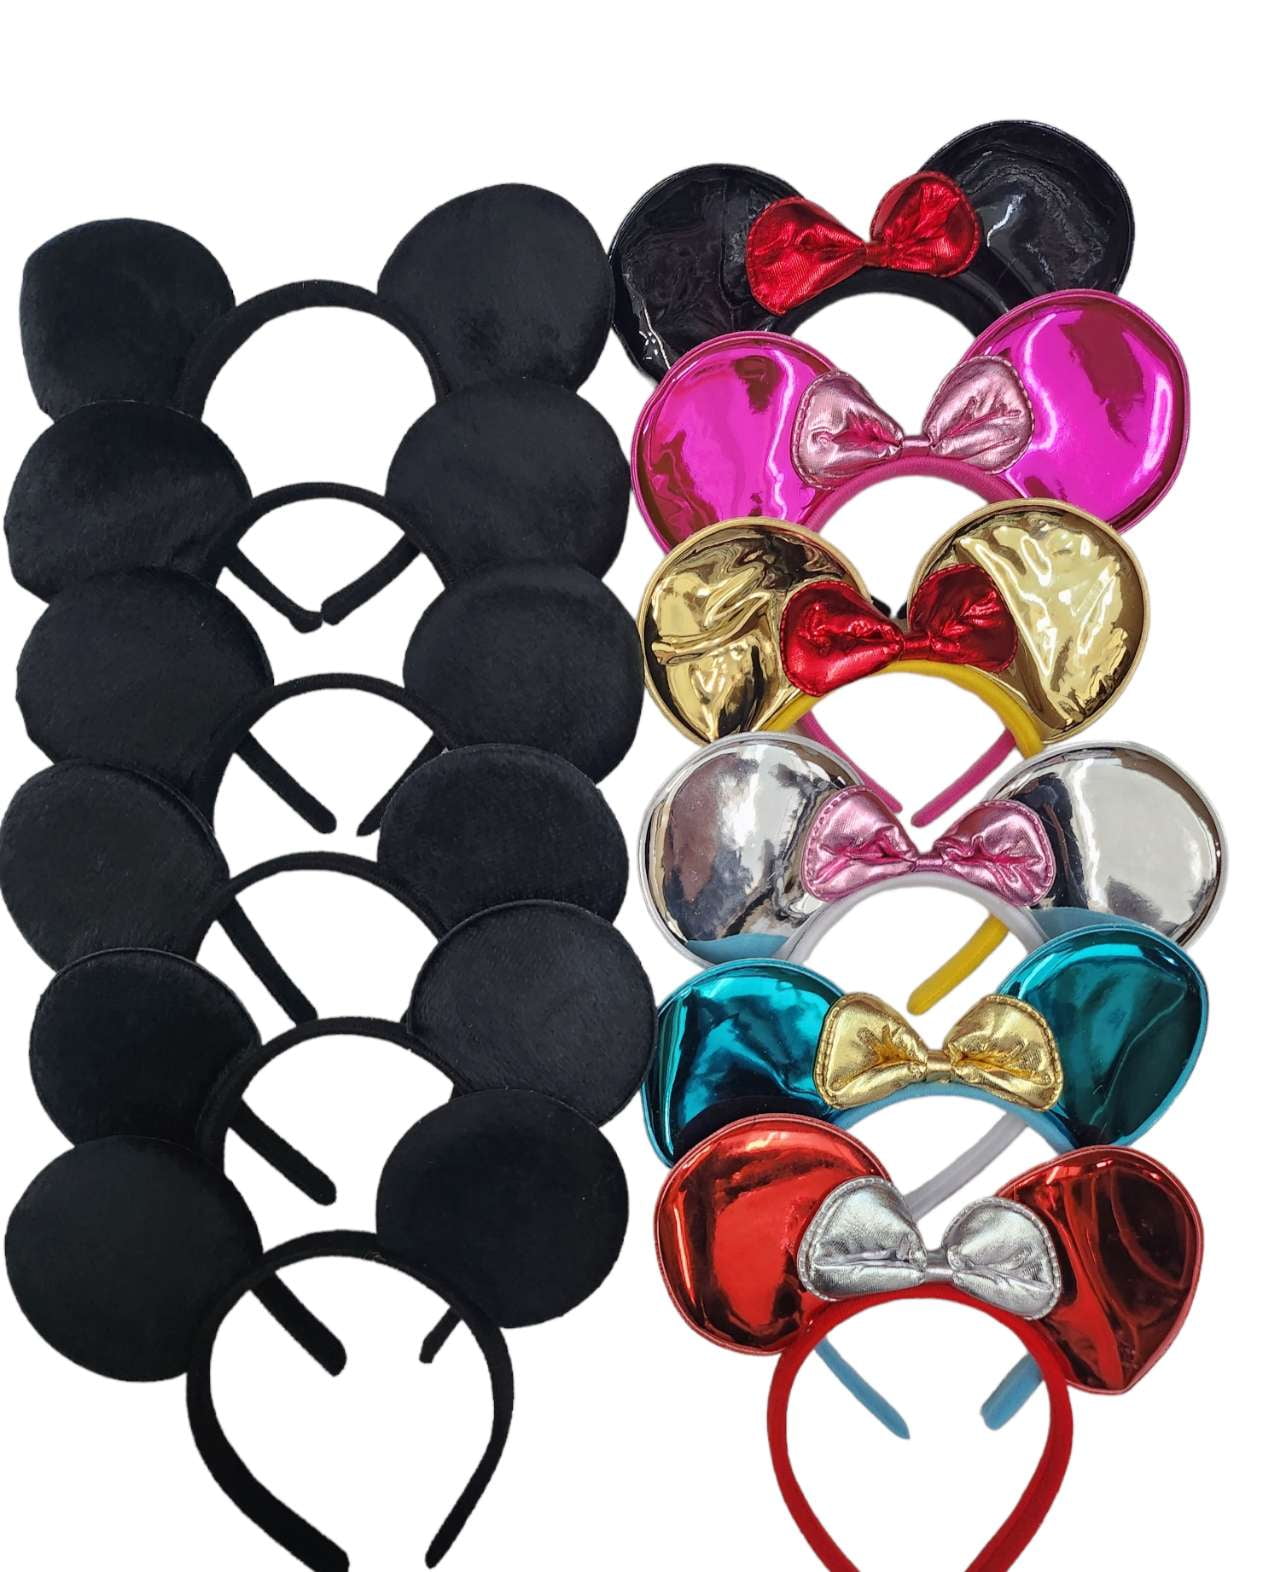 Which Minnie Mouse ears should I pack? #minniemouseears #disneytrip202, Minnie  Mouse